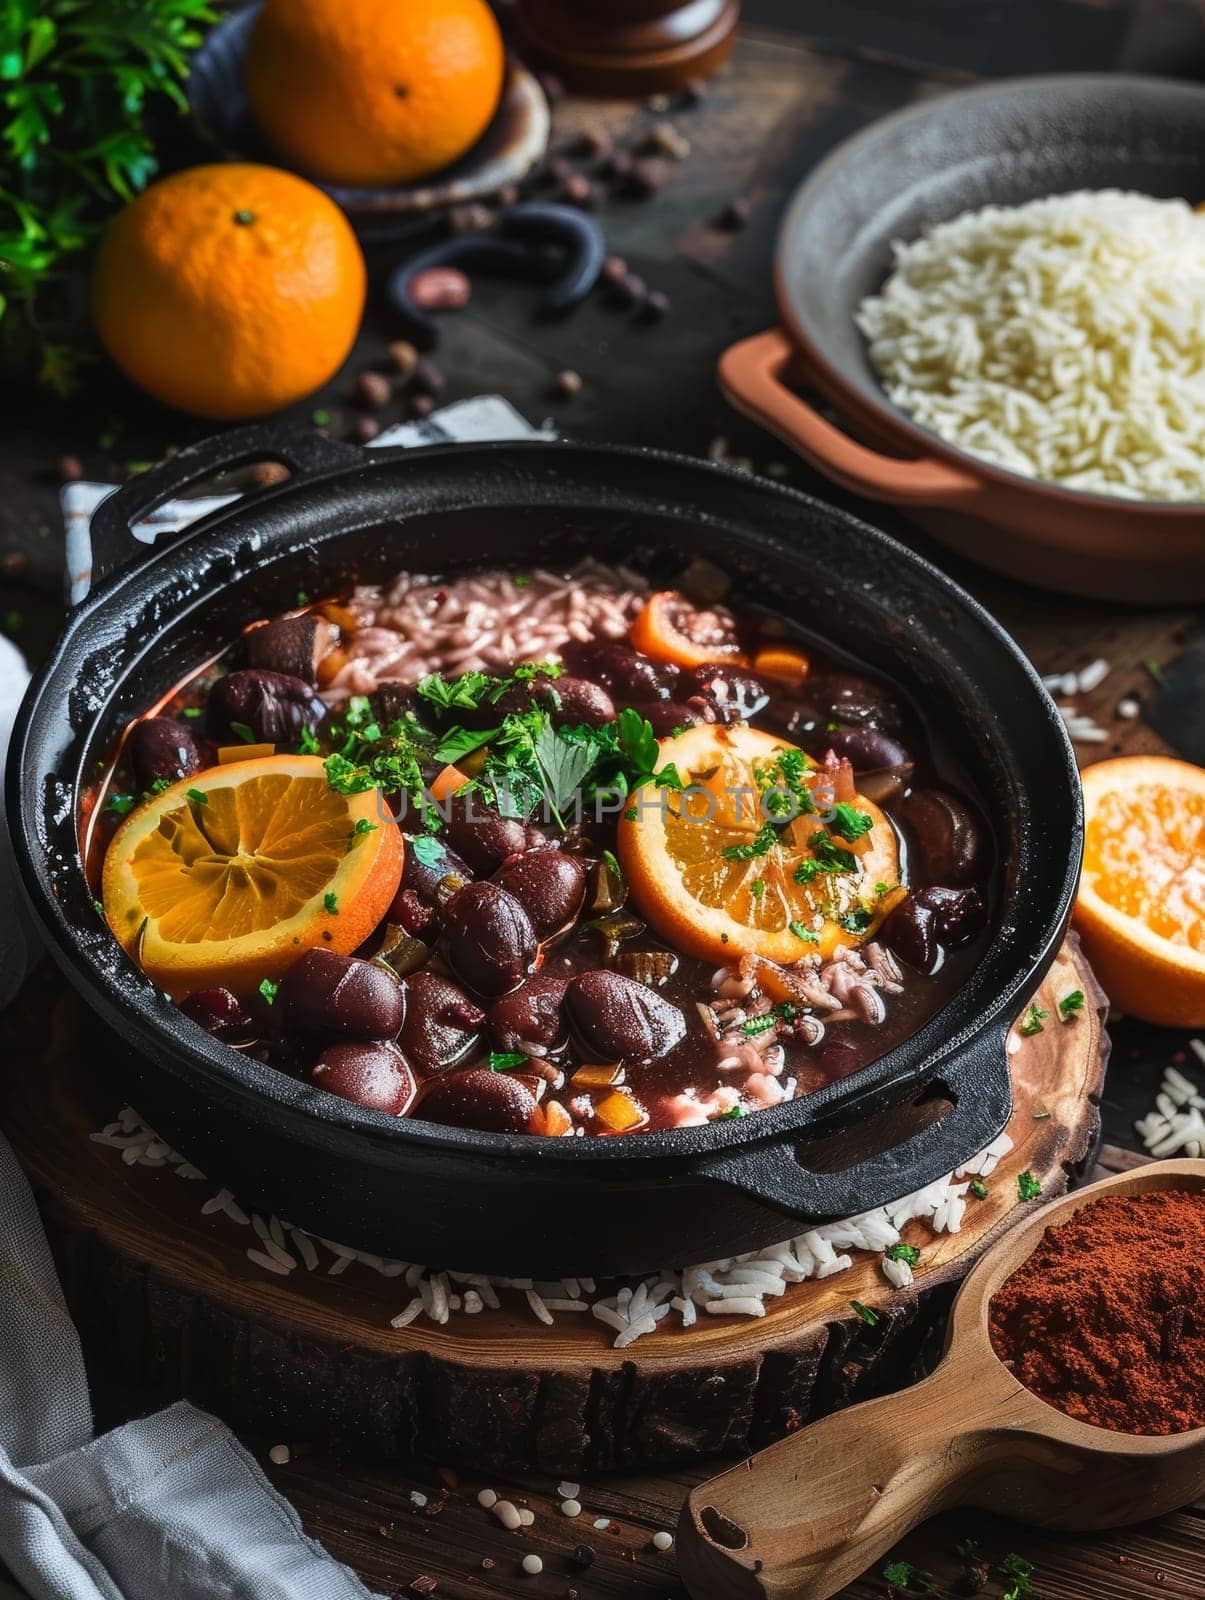 Authentic Brazilian feijoada, a traditional stew made with a variety of meats and beans, served in a cast-iron pot and accompanied by fragrant rice, refreshing oranges, and crunchy texture of farofa. by sfinks